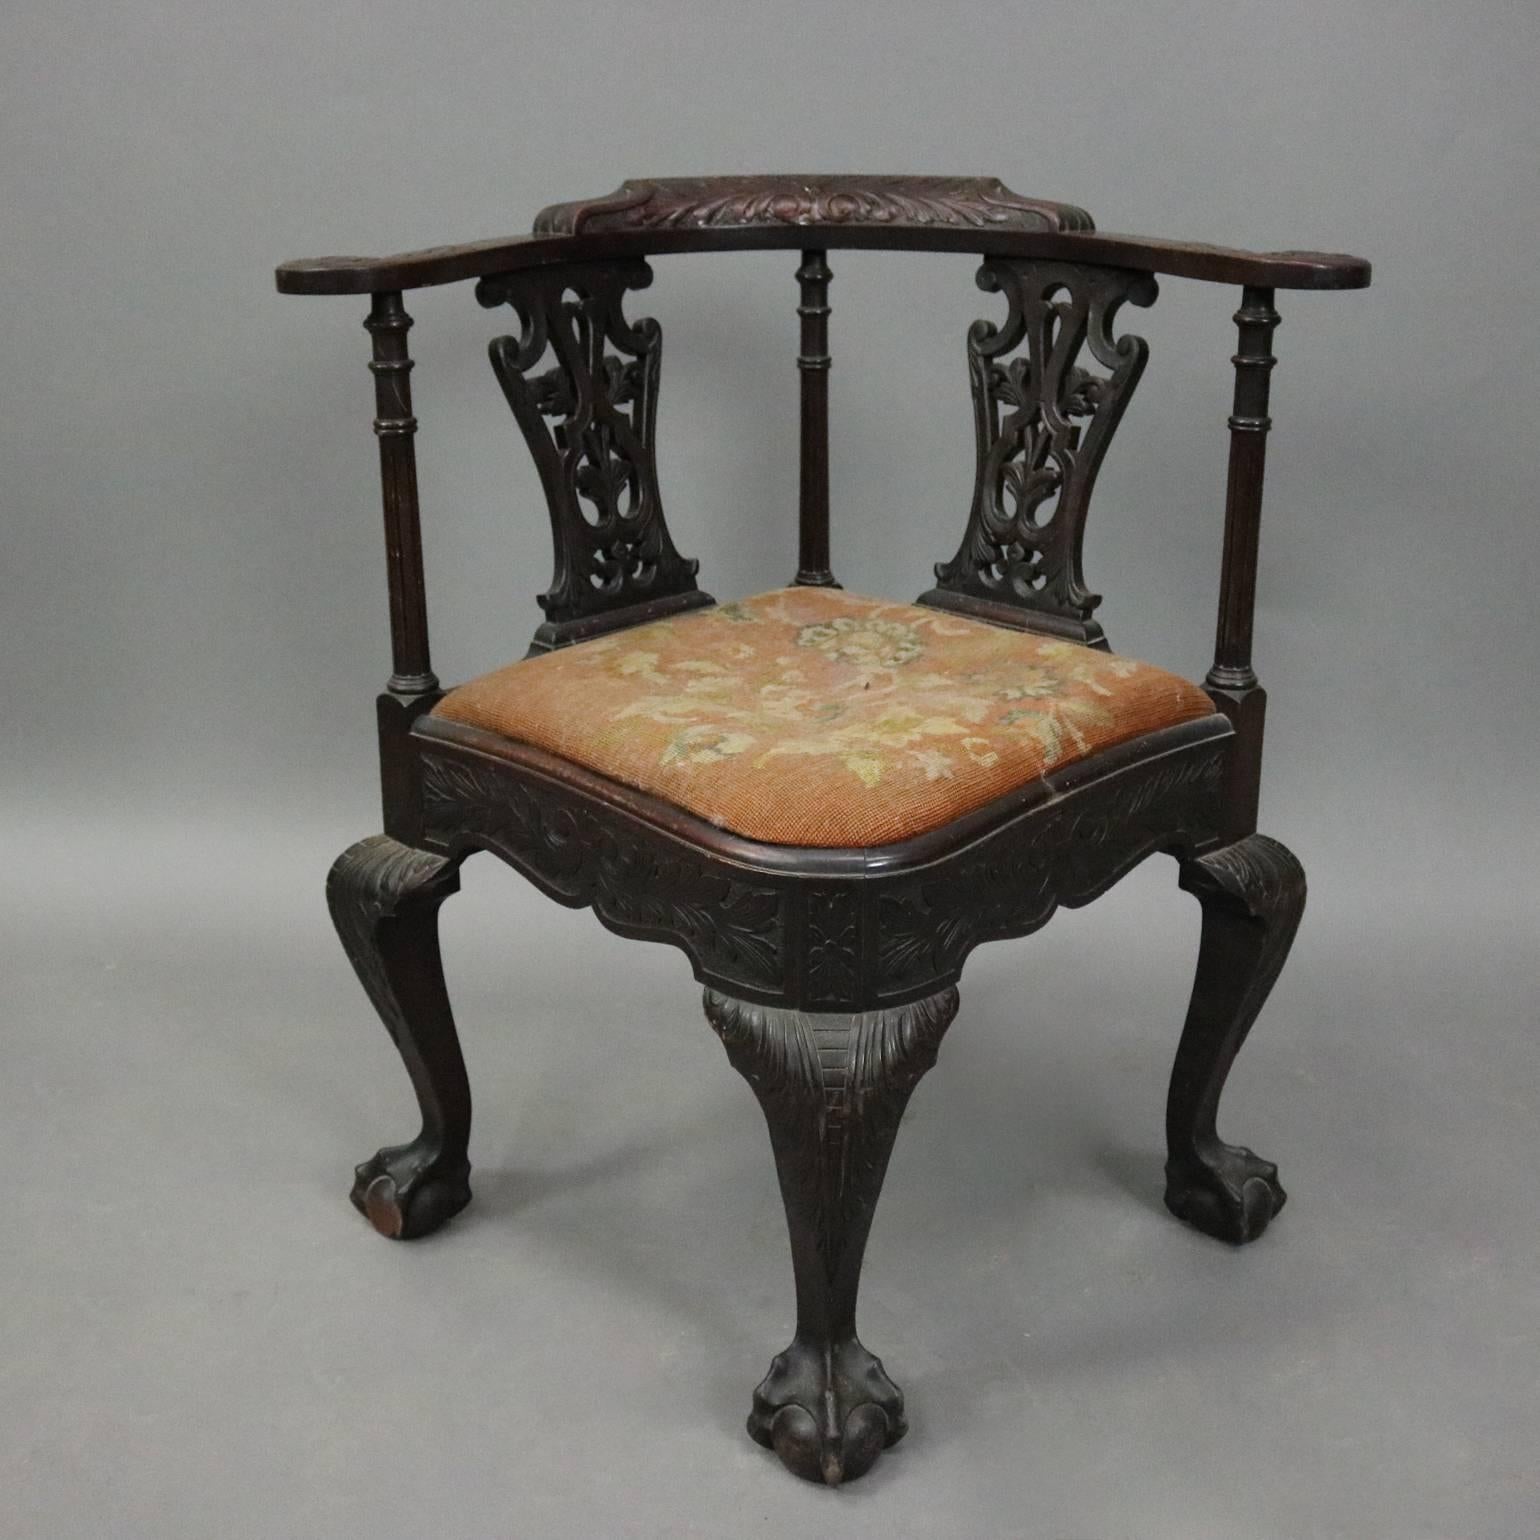 Antique Chippendale style corner chair features foliate carved frame with claw and ball feet and pierced back, needlepoint upholstered seat, circa 1880

Measures: 31" H x 29" W x 25" D, 19" seat height.